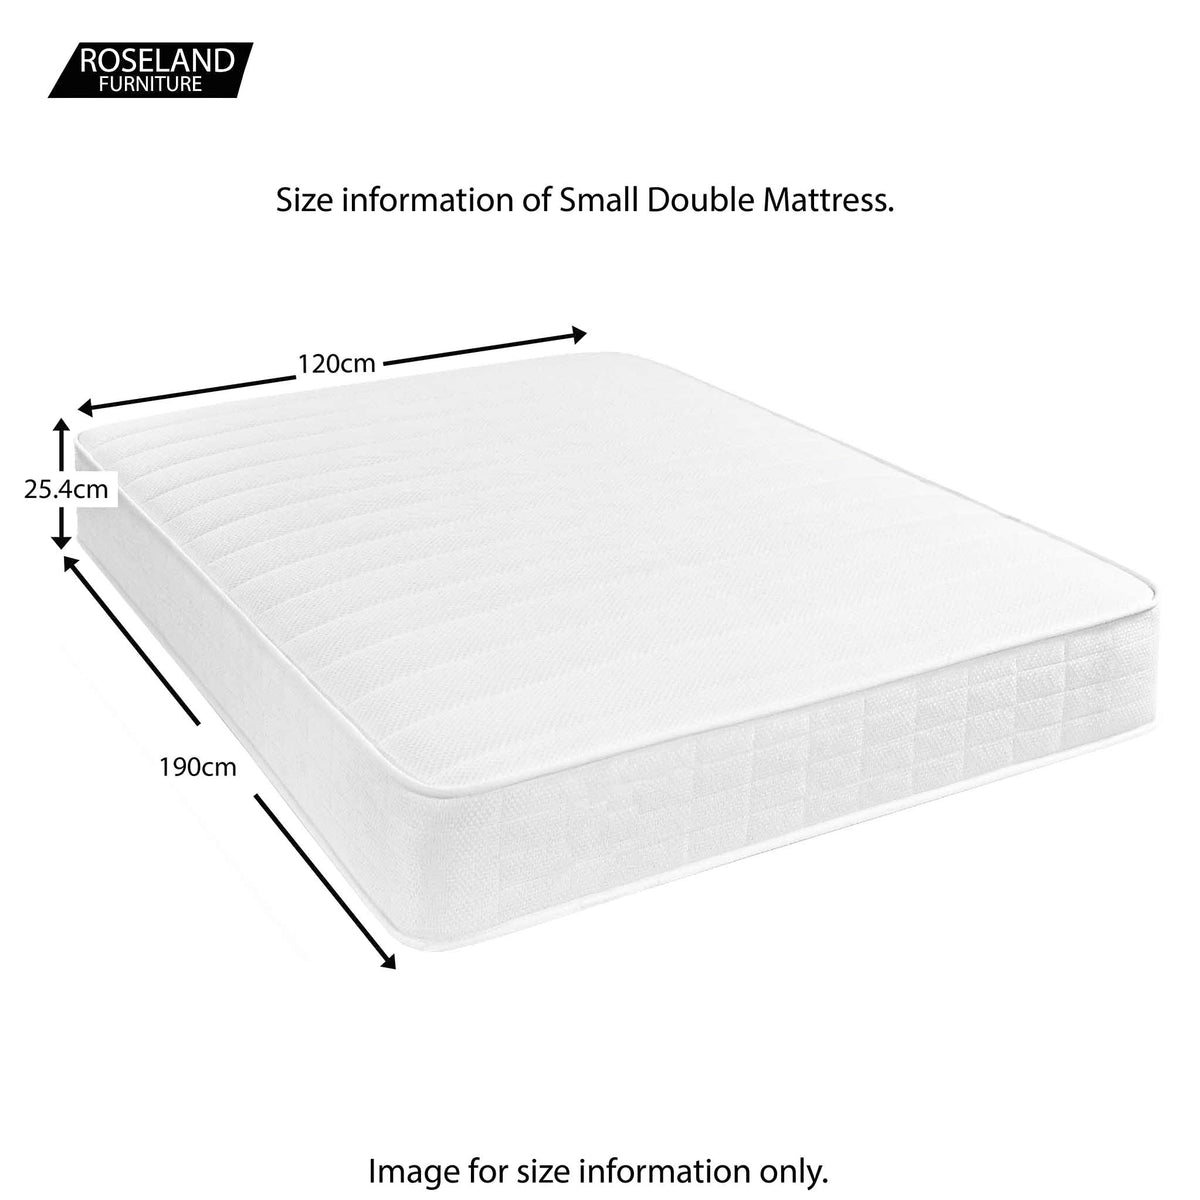 Roseland Sleep Primrose - Small Double Size Guide